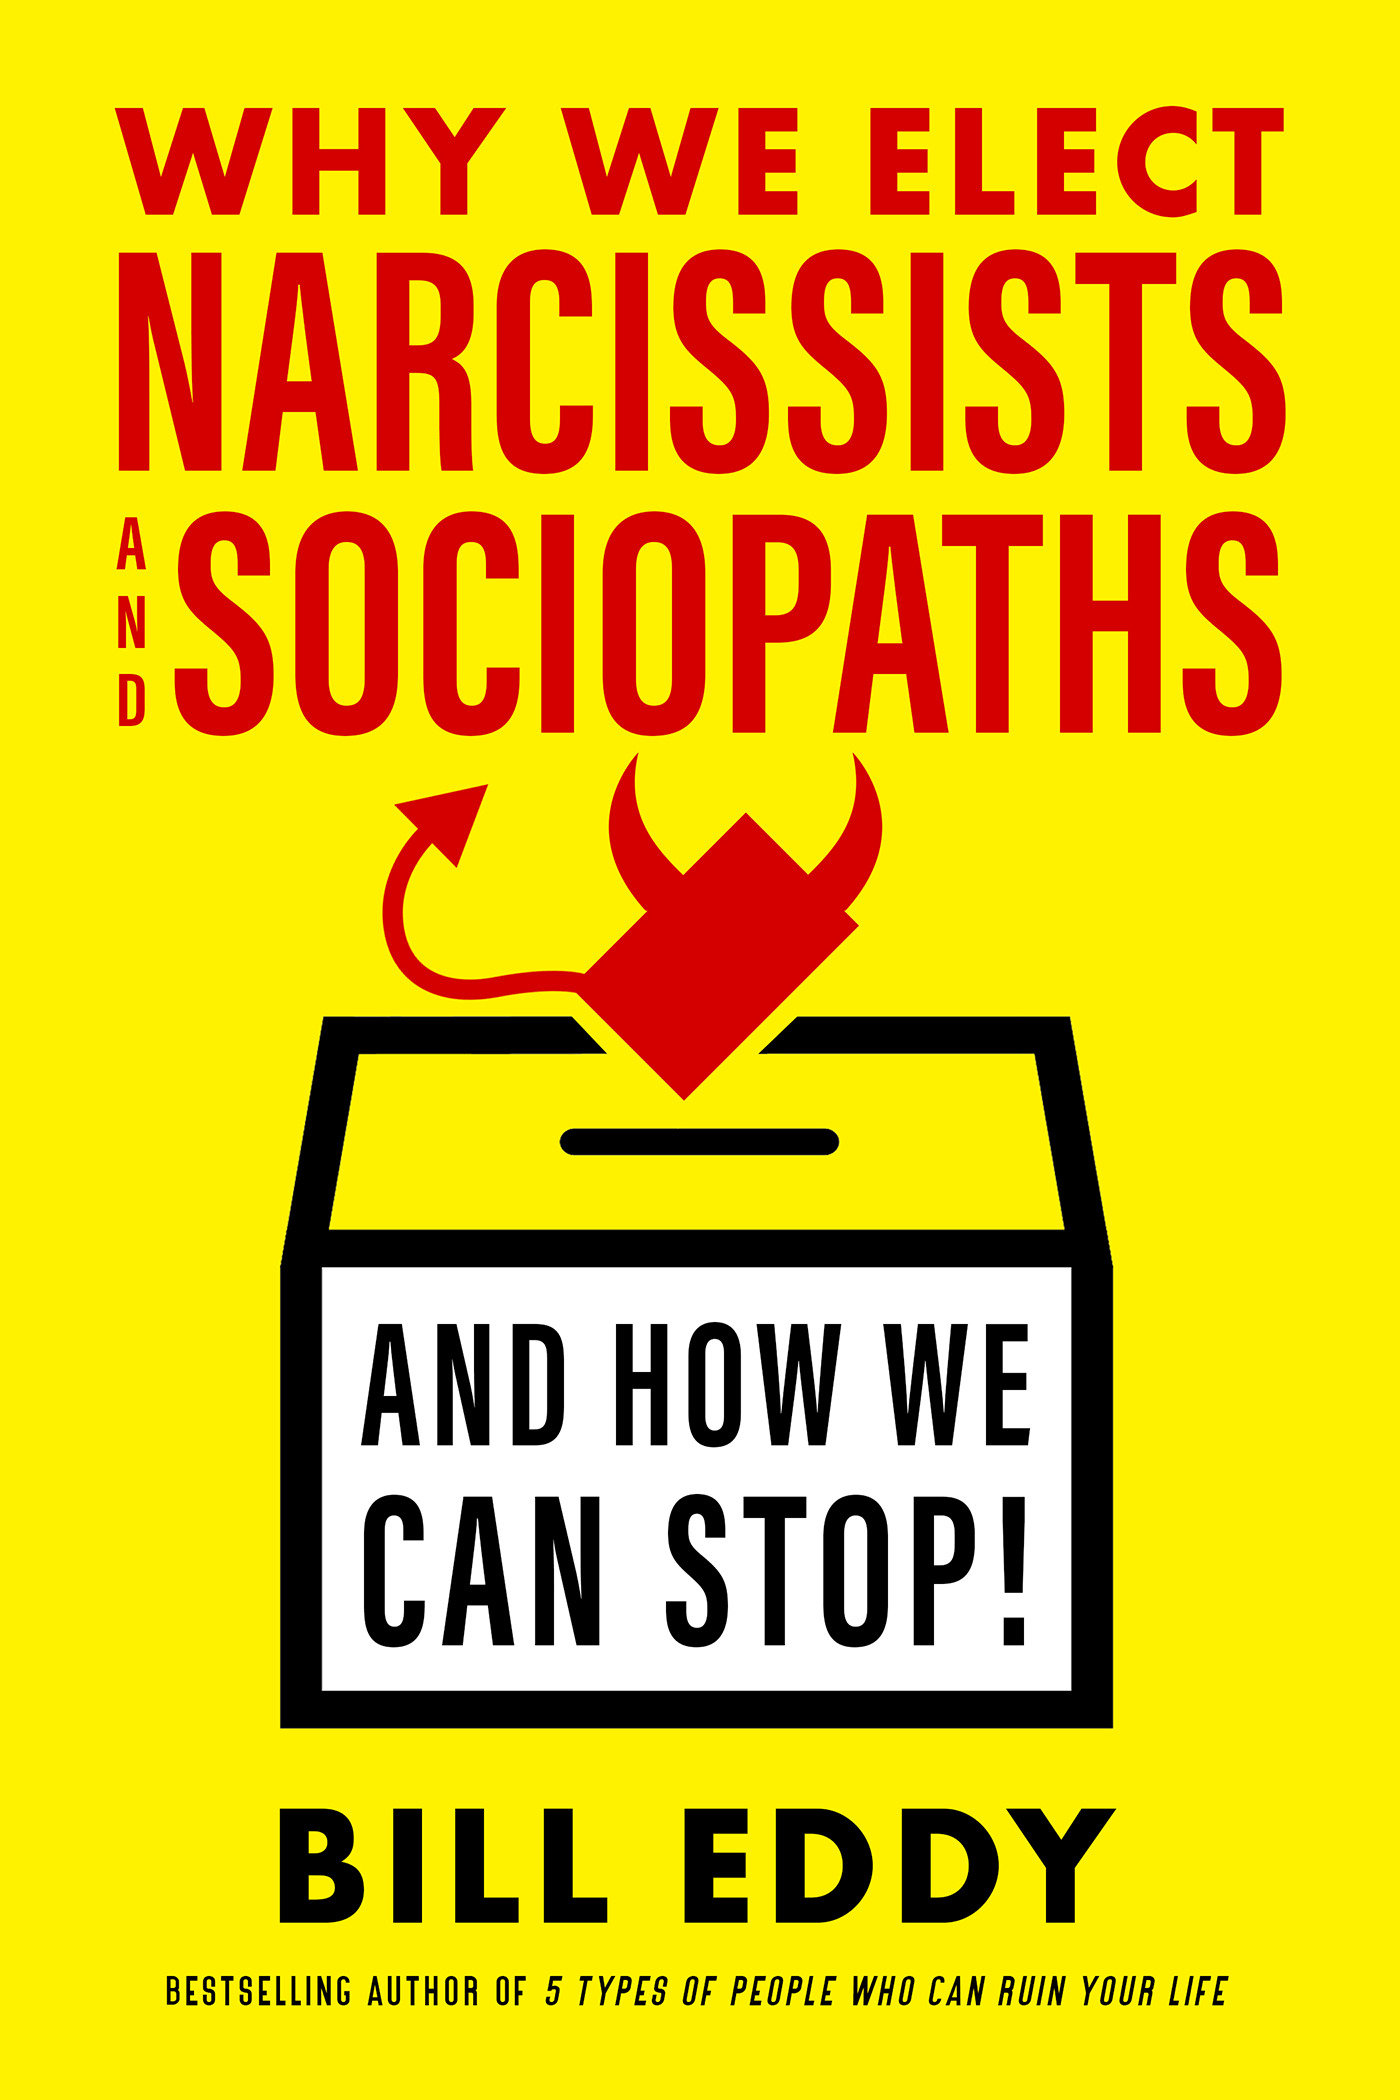 Why We Elect Narcissists And Sociopaths—And How We Can Stop (Hardcover Book)